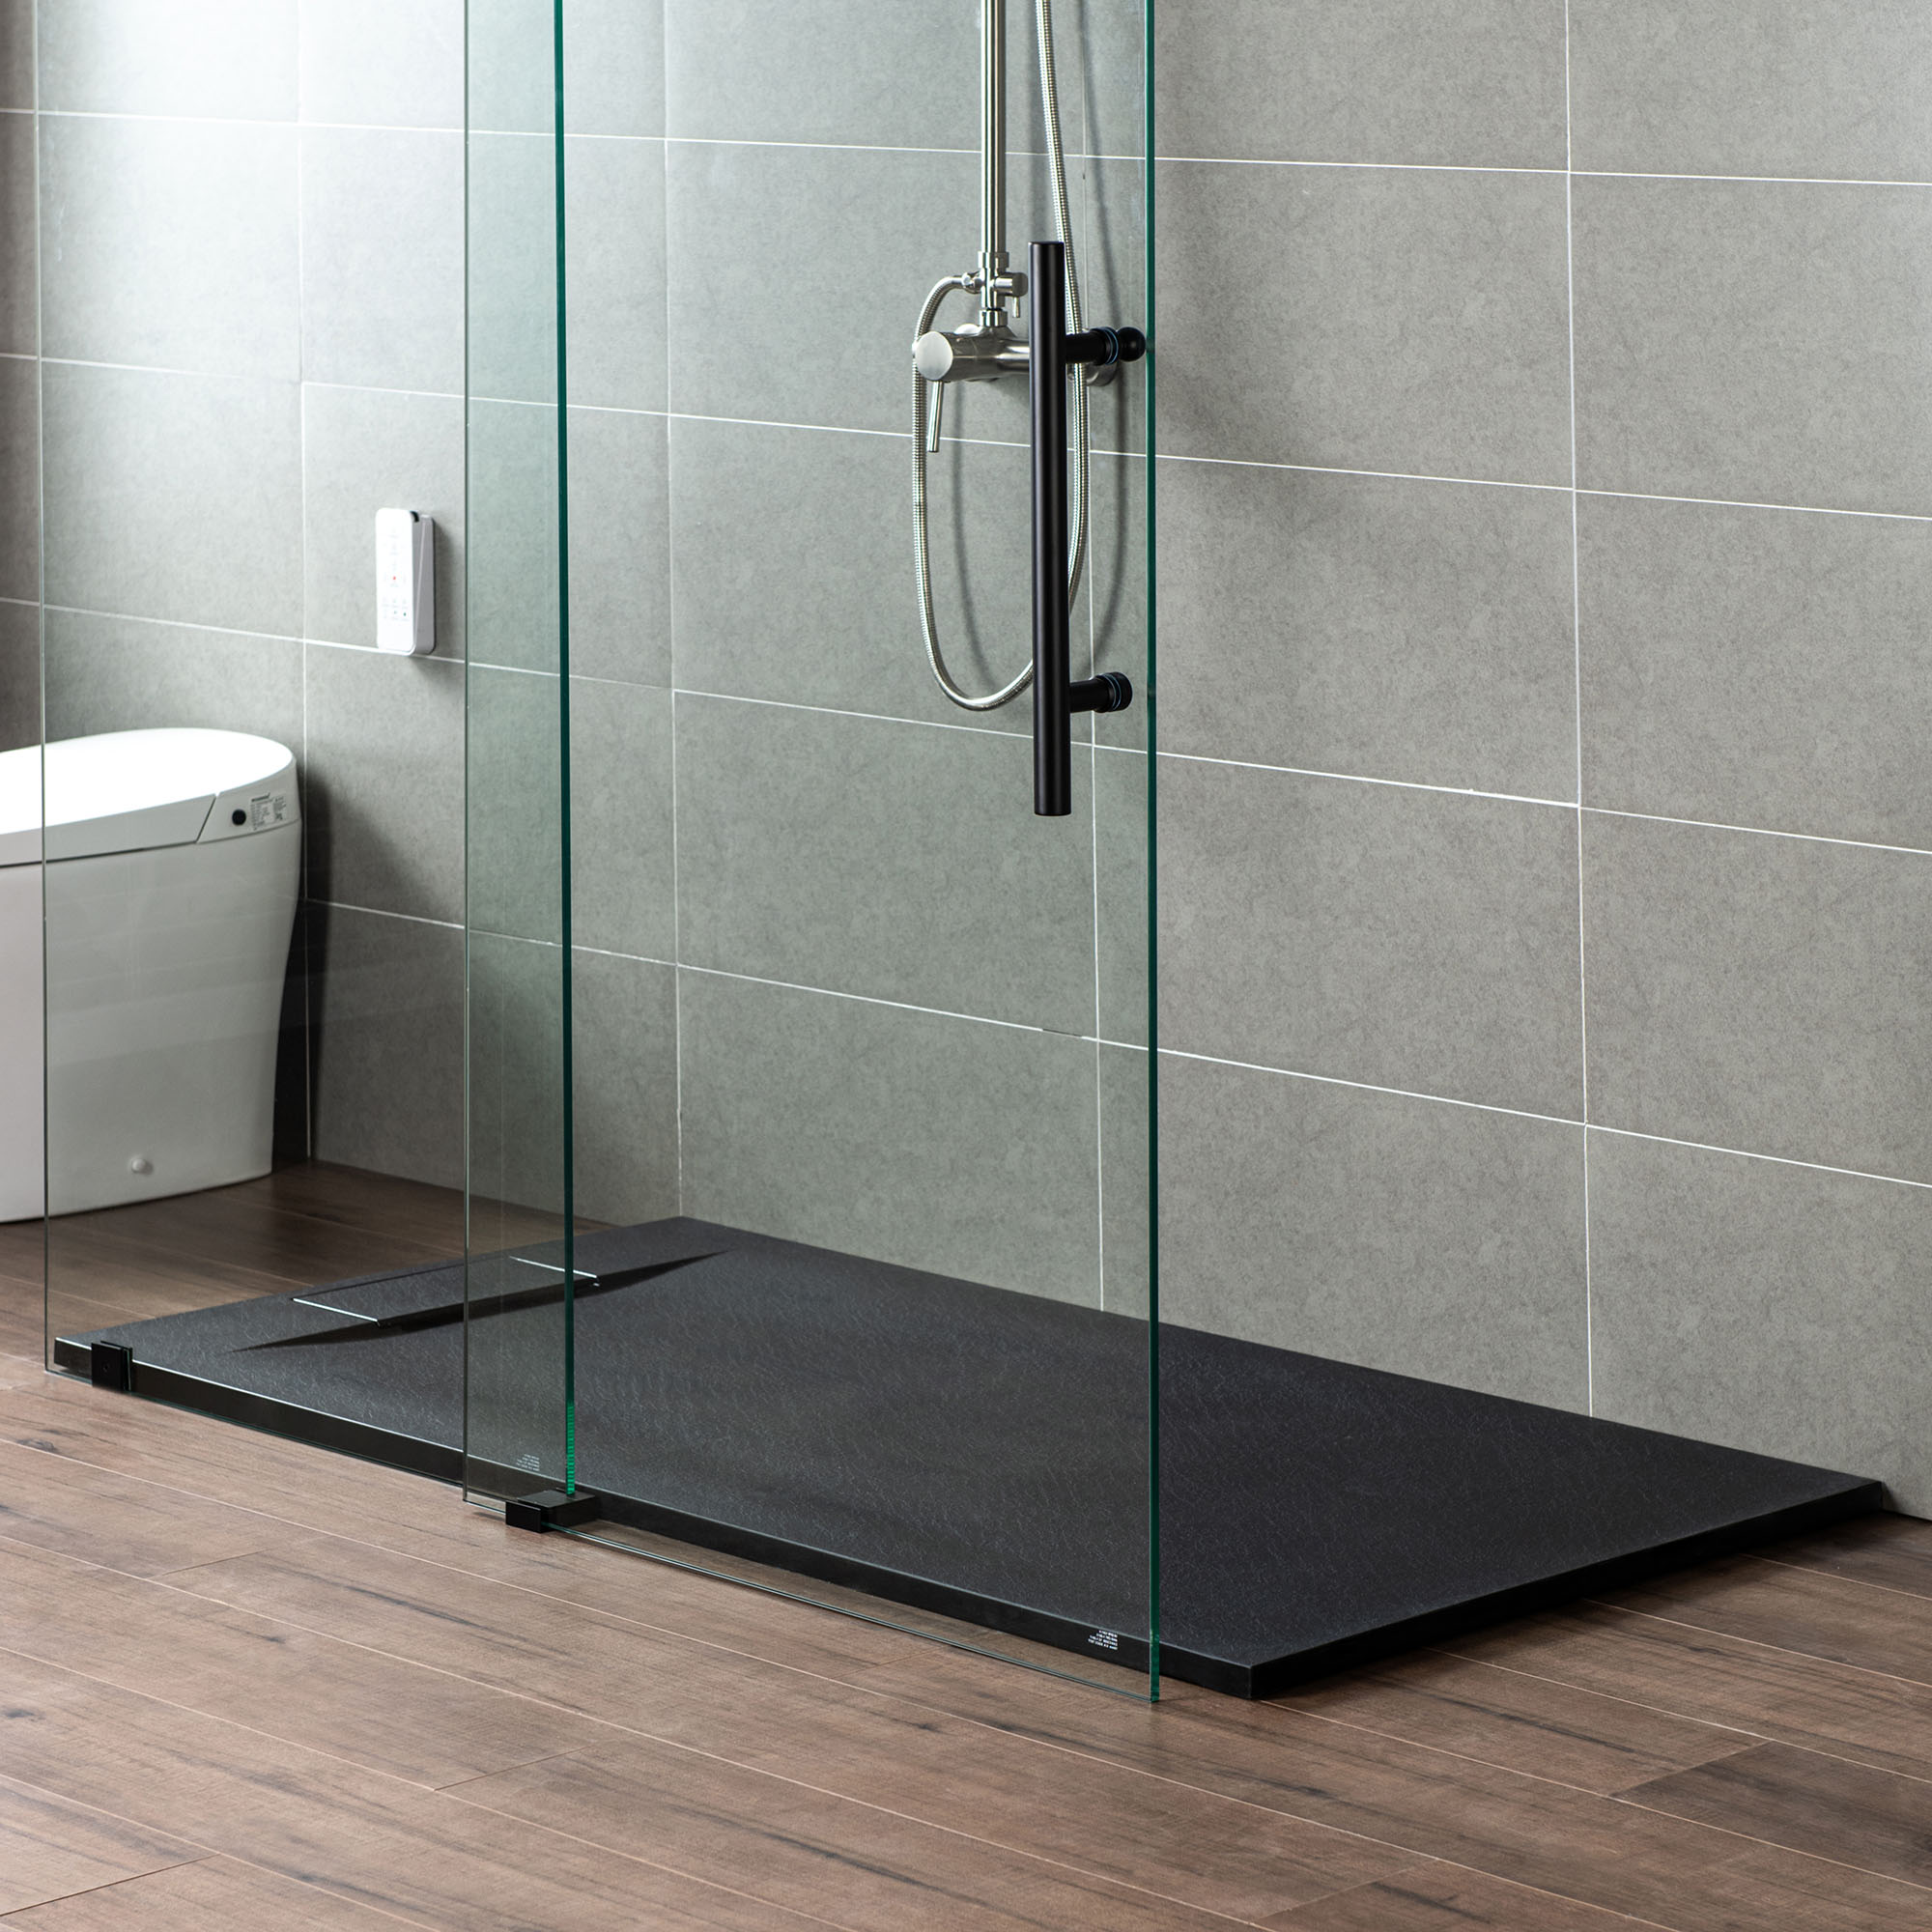  WOODBRIDGE 48-in L x 32-in W Zero Threshold End Drain Shower Base with Reversable Drain Placement, Matching Decorative Drain Plate and Tile Flange, Wheel Chair Access, Low Profile, Black_12351